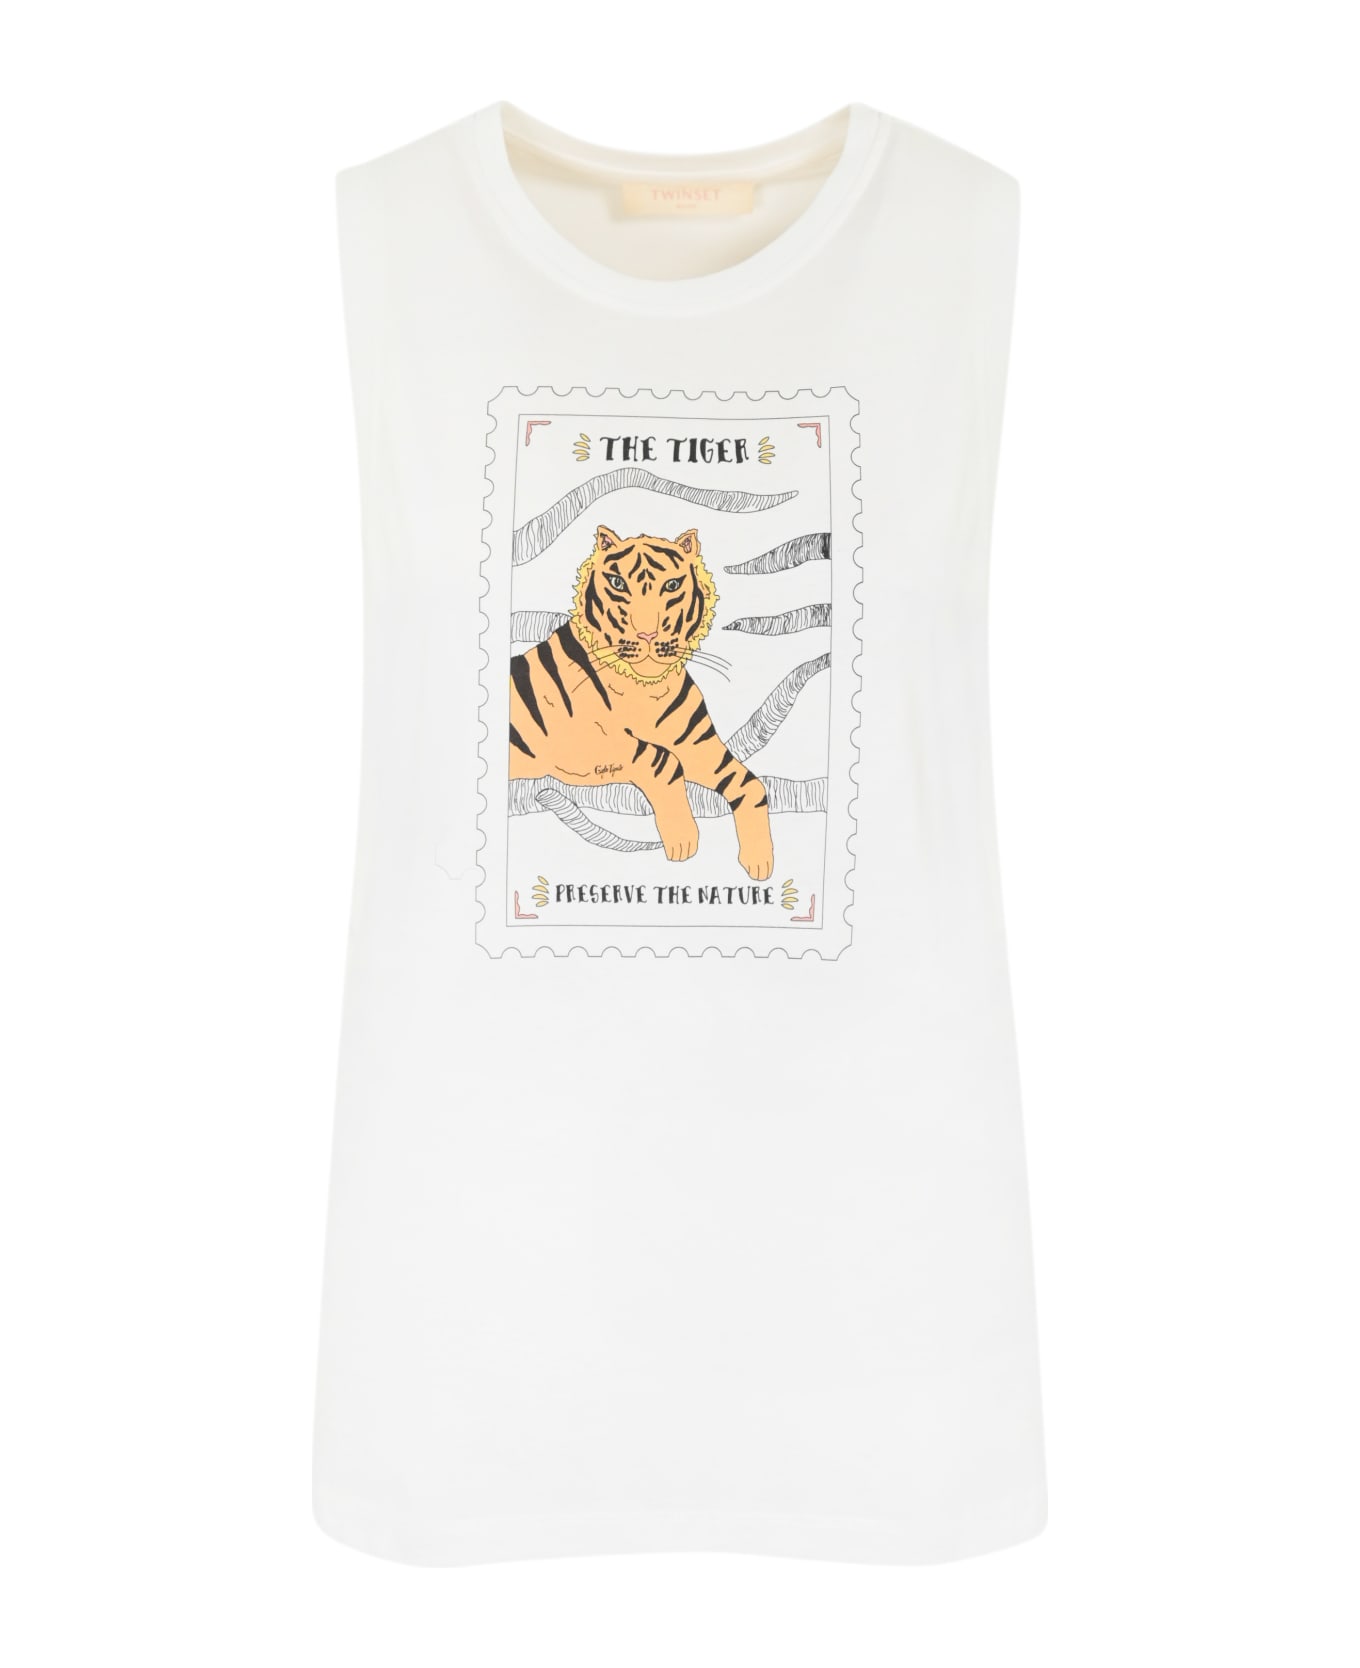 TwinSet Tiger Lily Top X Twinset - St.tiger